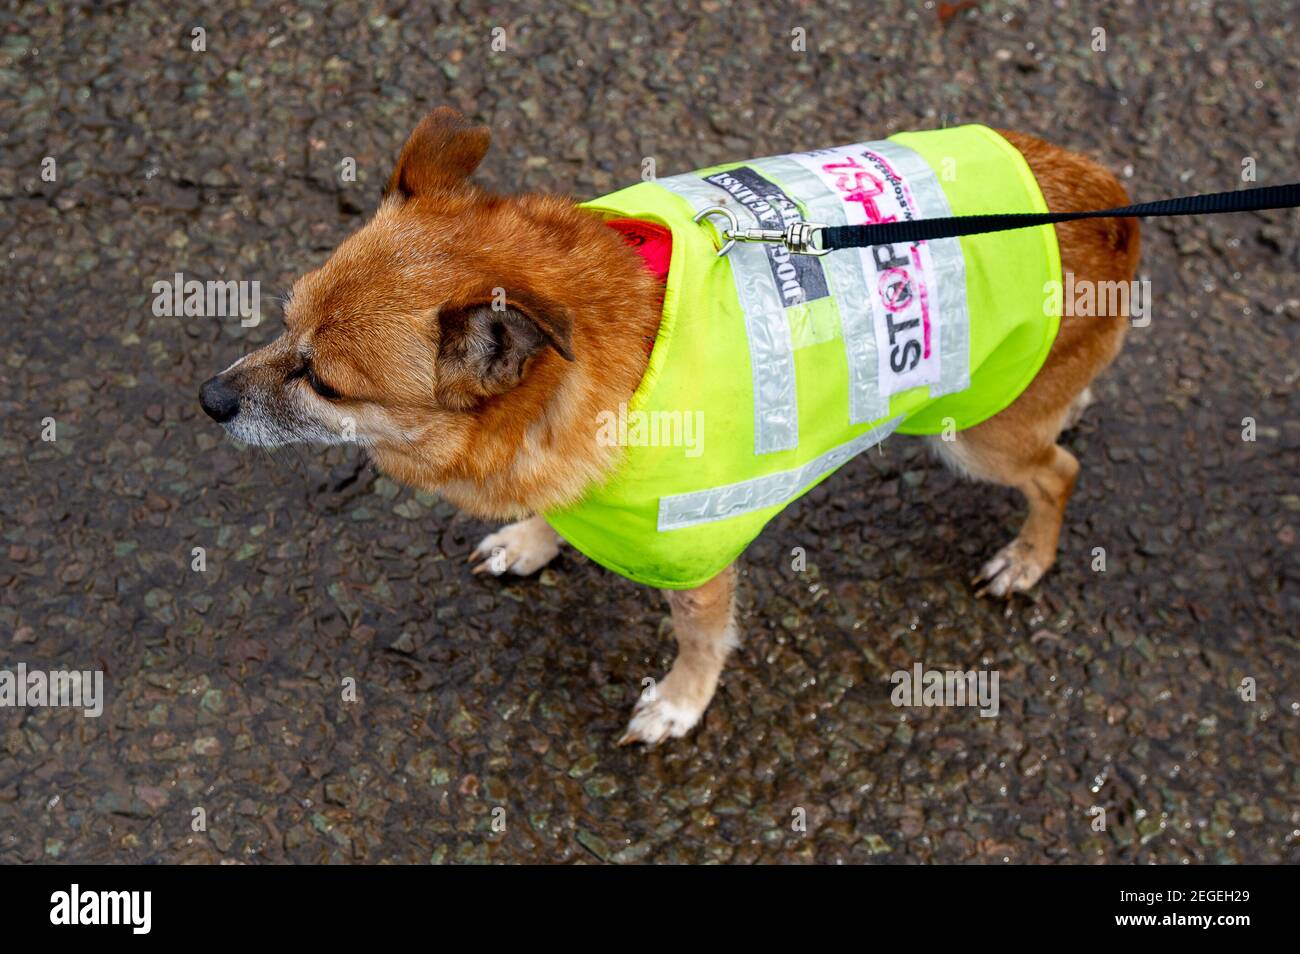 Aylesbury, Buckinghamshire, UK. 18th February, 2021. A dog wears a Stop HS2 high viz jacket. Having fenced off an area of woodland called the Spinney in Aylesbury earlier this week, last night tree surgeons working for HS2 Ltd were felling trees into the early hours this morning. They were doing this right next to the existing railway with the potential to cause an accident as trains were still passing by next to the felling. HS2 Ltd have been unable to provide a copy of a wildlife licence from Natural England allowing them to fell in this area. The High Speed Rail 2 from London to Birmingham Stock Photo